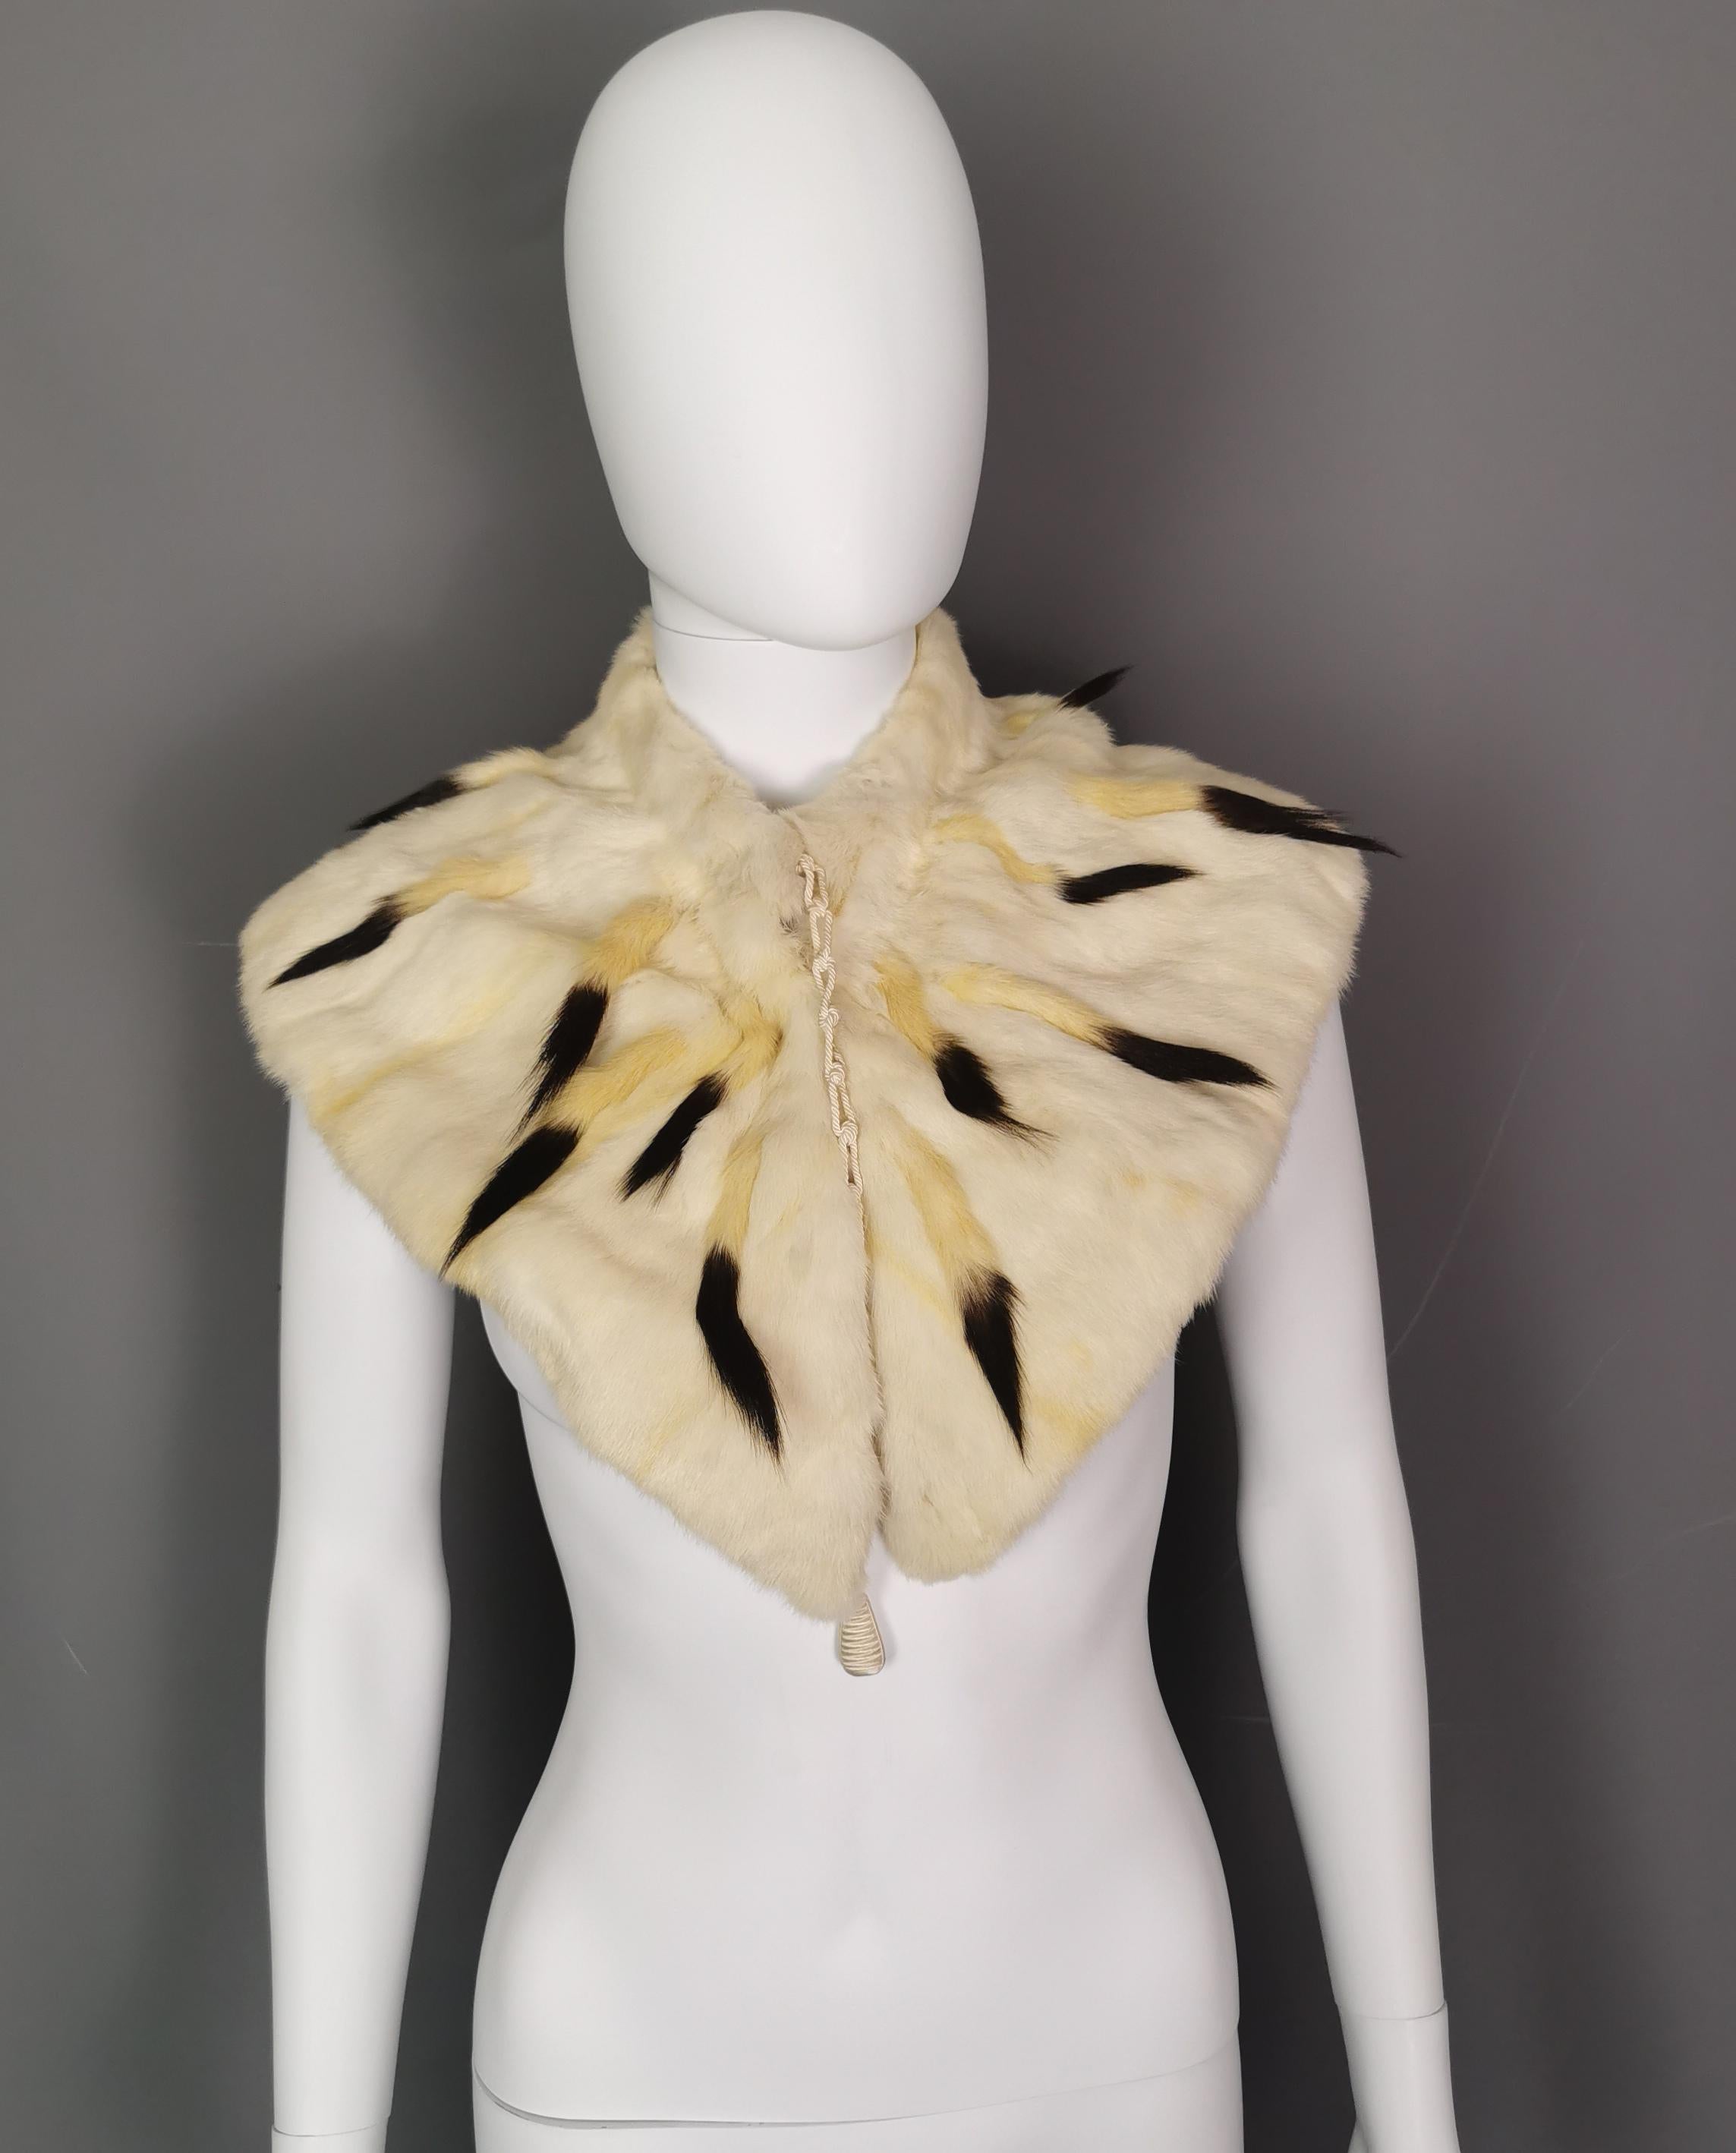 A truly beautiful antique ermine capelet.

Late Victorian era, ermine being the winter coat of the stoat it was usually reserved for Royalty and the higher classes, due to the rarity and cost.

This gives the capelet a very regal feel as it is